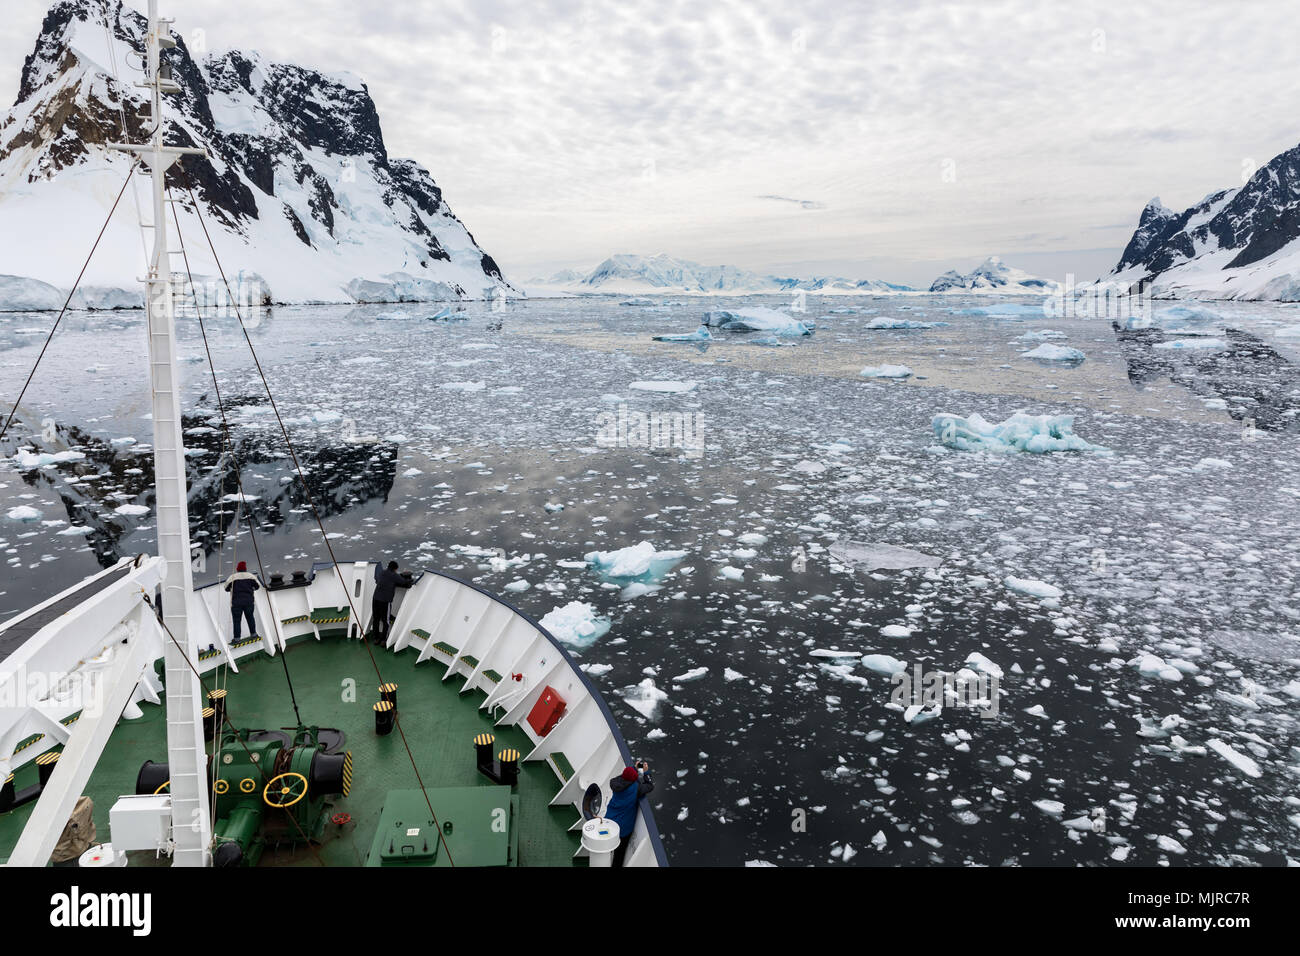 A ship travels through snow covered mountains and water filled with ice while passengers take photos and enjoy the view, Lemaire Channel, Antarctica Stock Photo